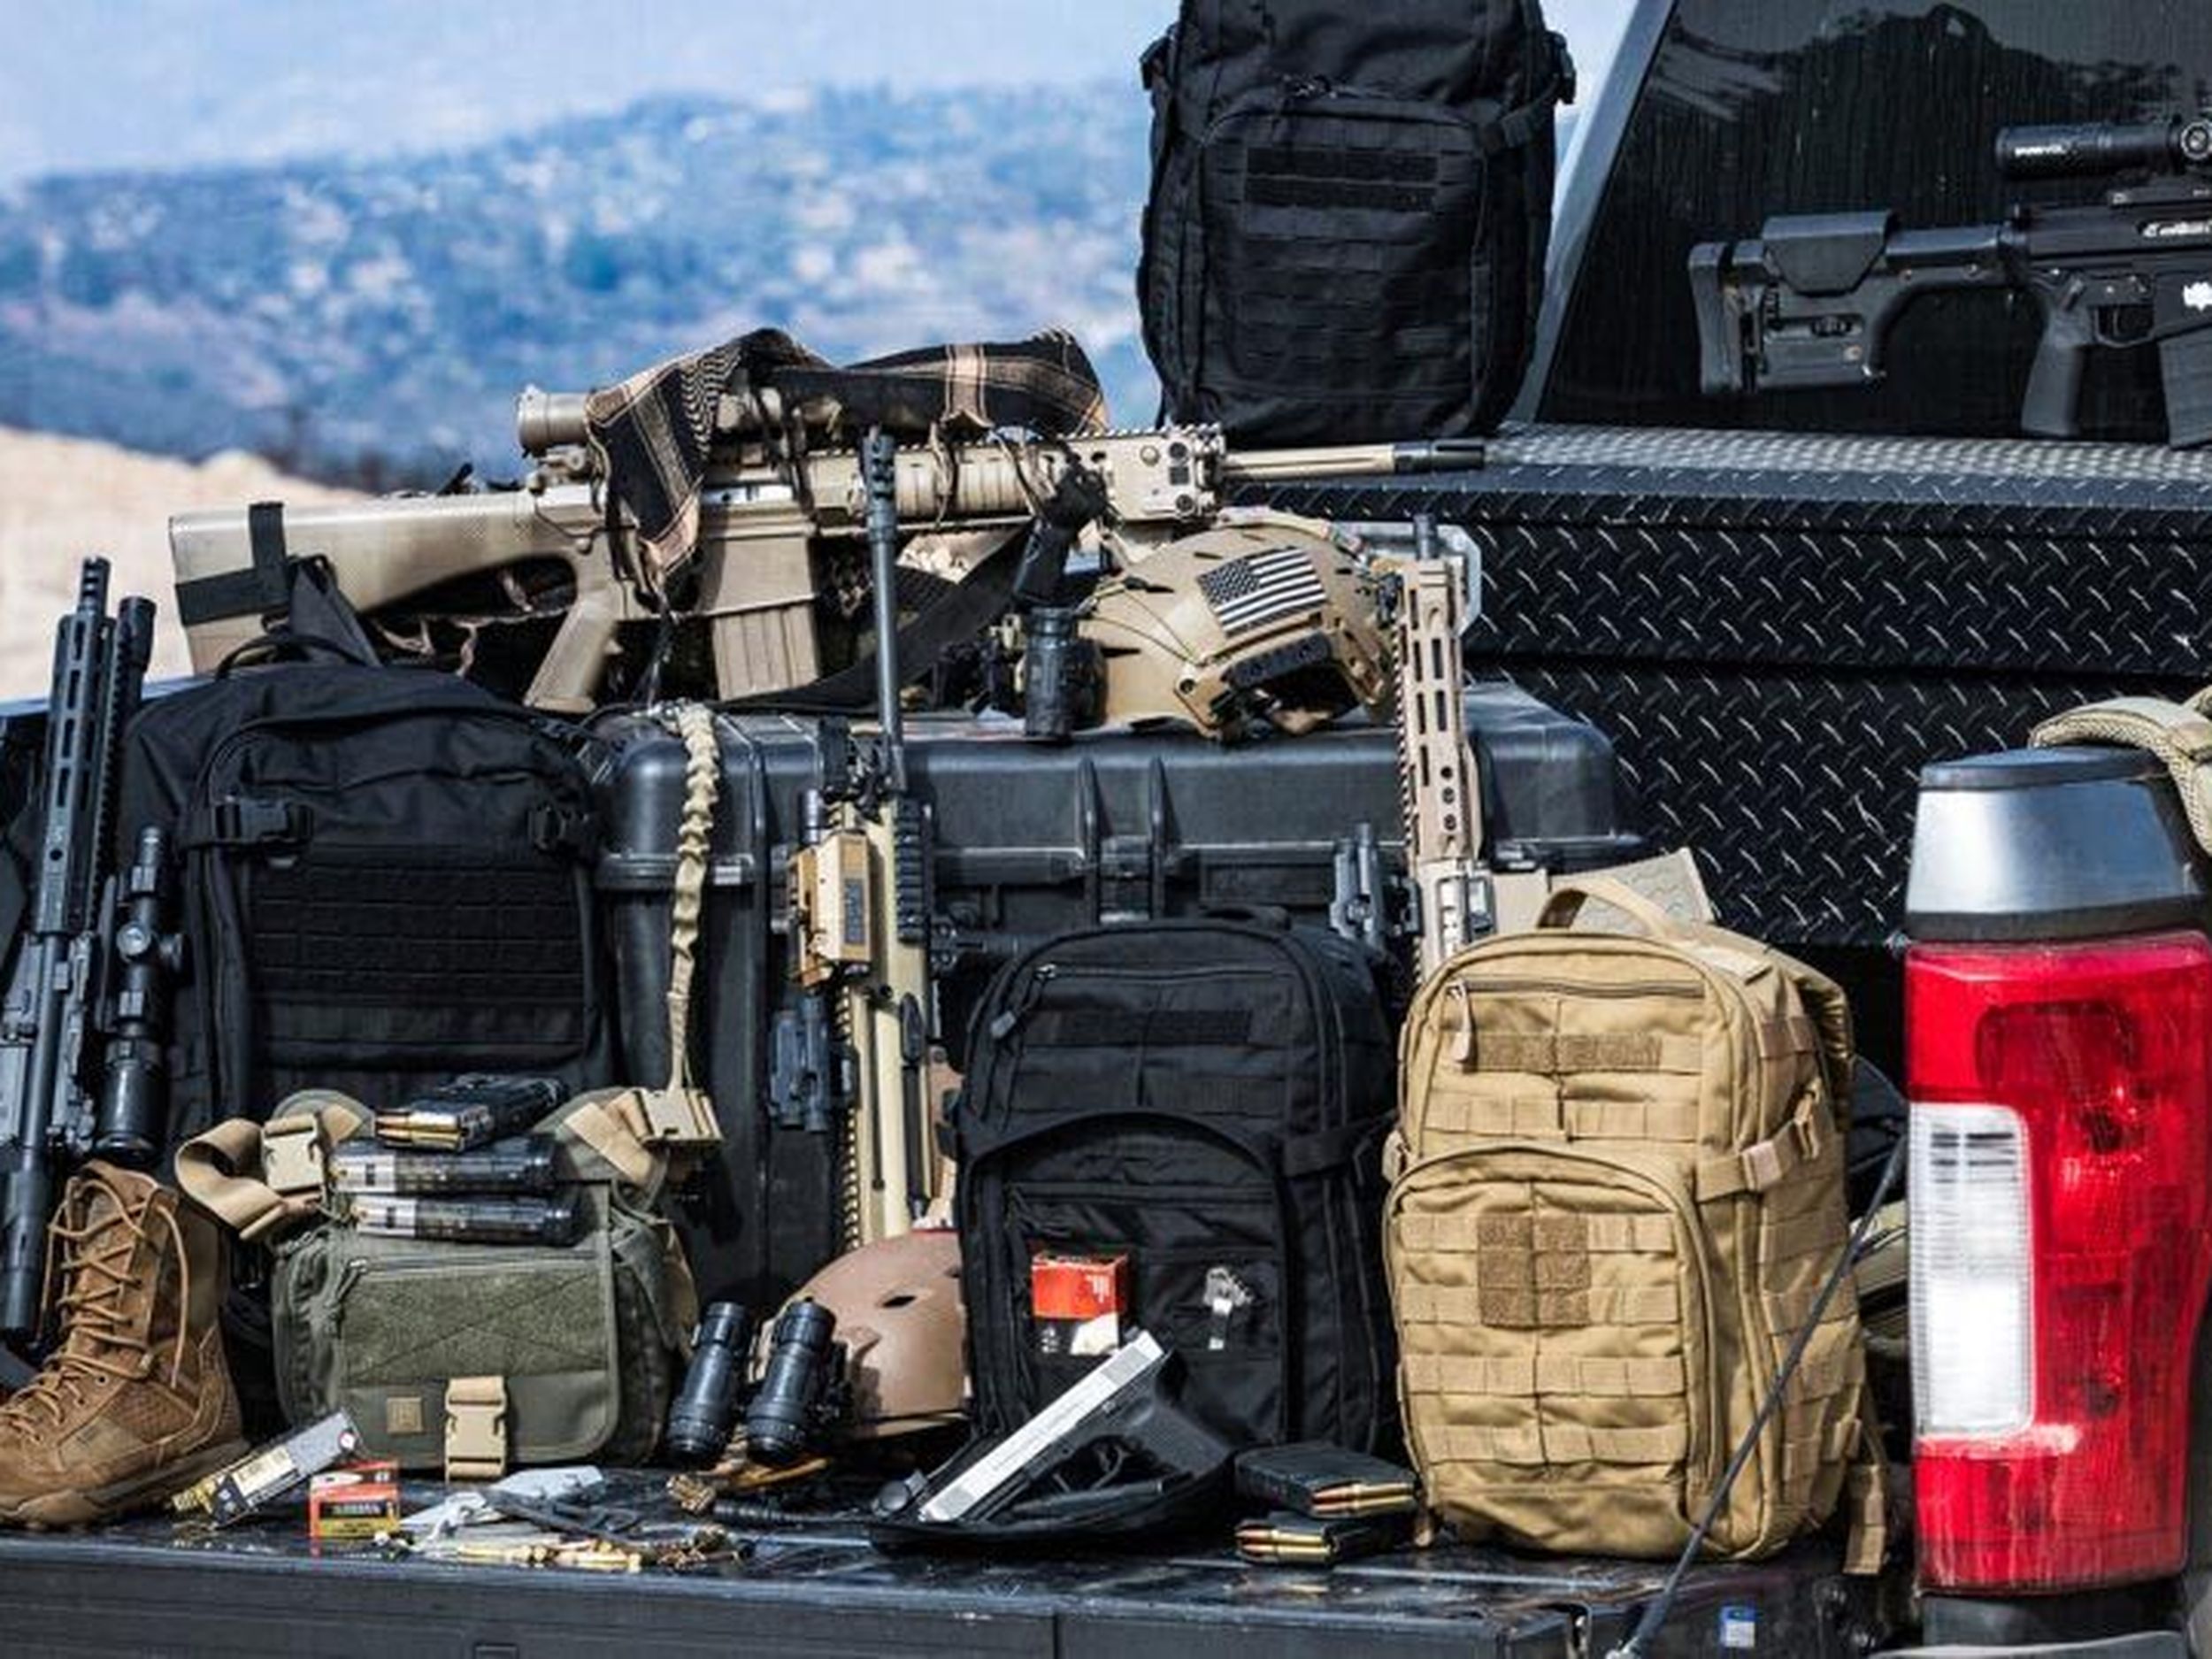 Introduction to Law Enforcement Tactical Gear - 5.11 Community